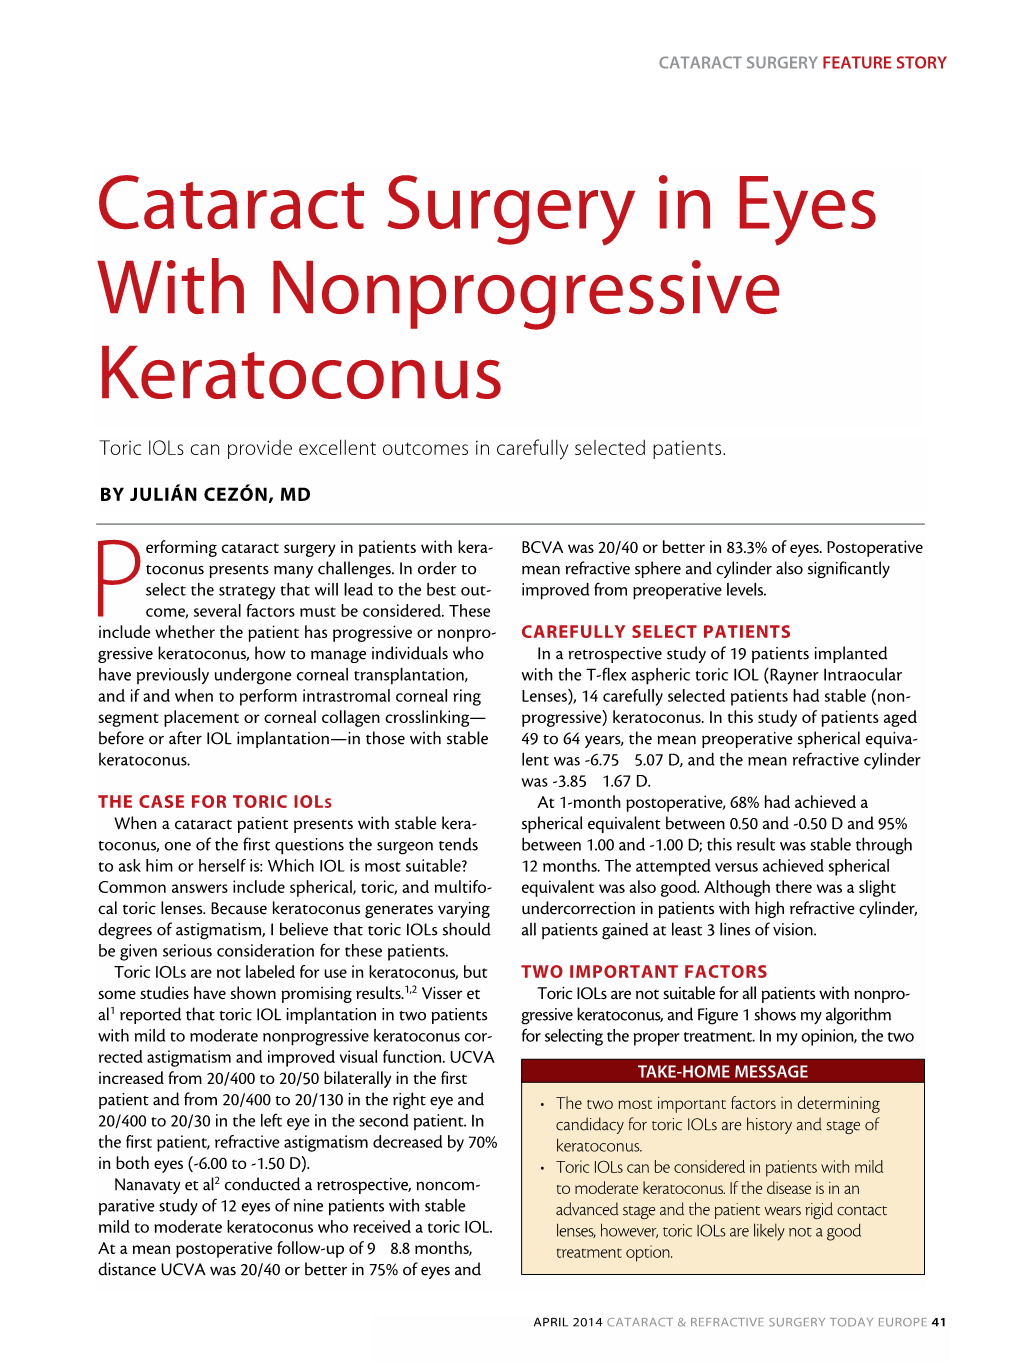 Cataract Surgery in Eyes with Nonprogressive Keratoconus Toric Iols Can Provide Excellent Outcomes in Carefully Selected Patients